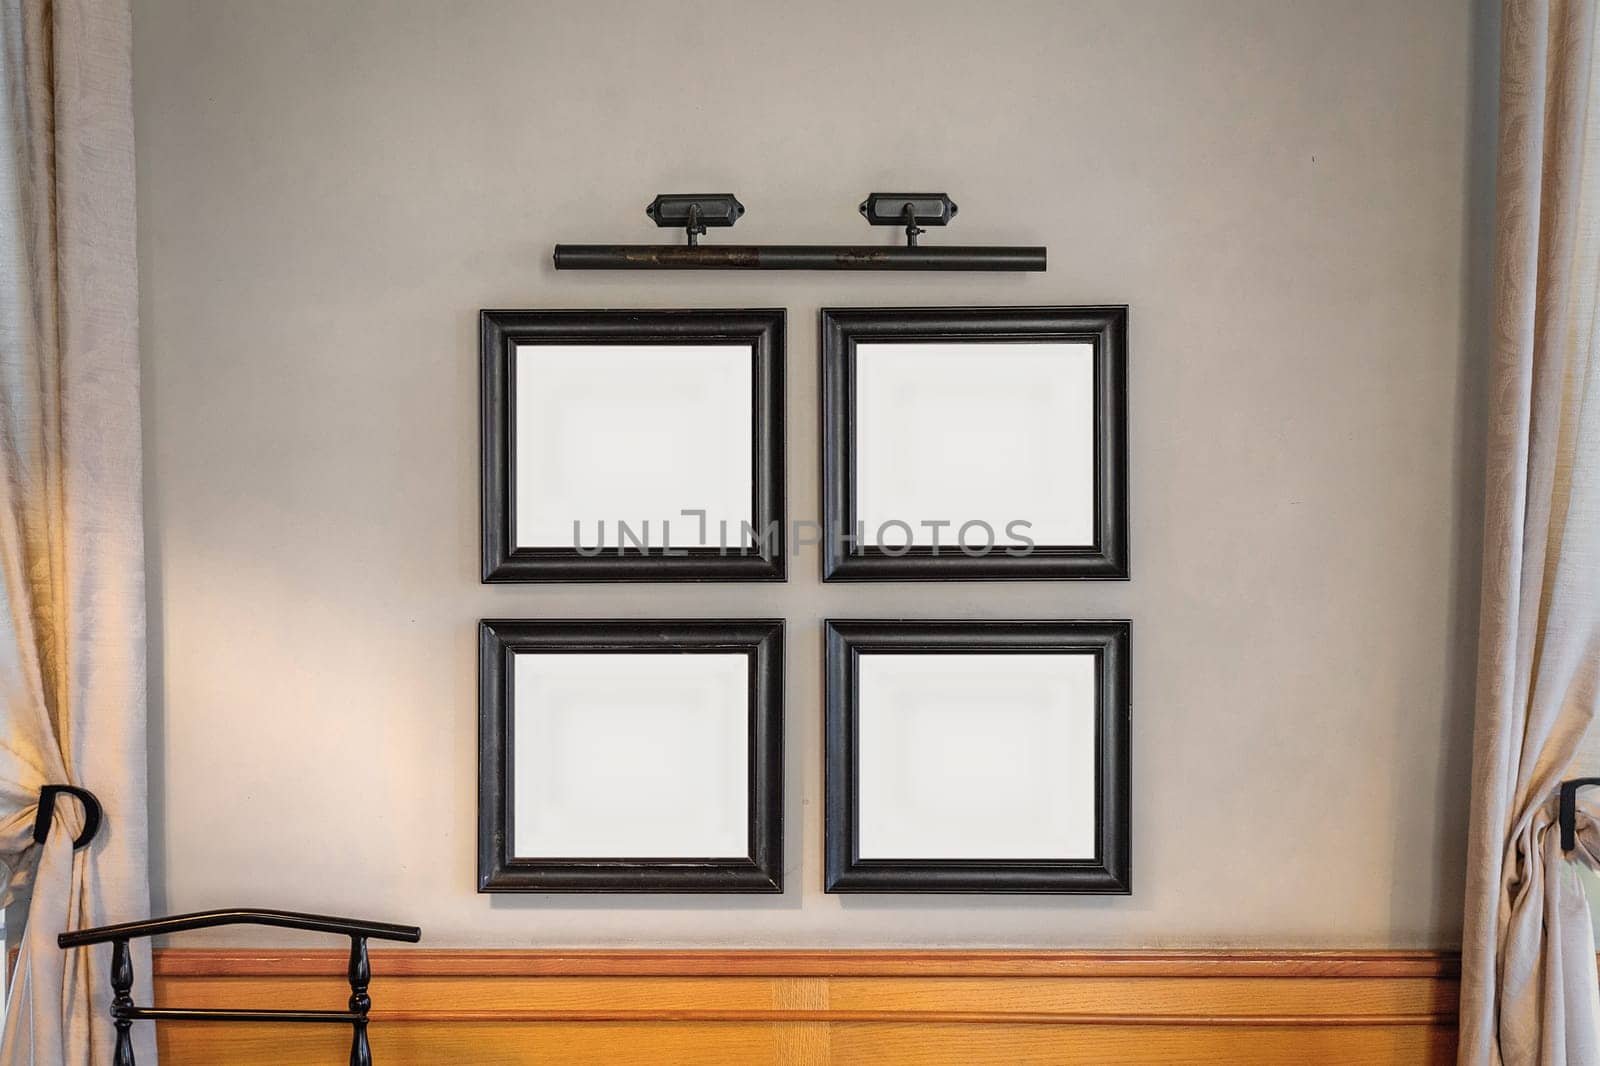 Mockup with 4 frames for a painting or photograph in the wall between the windows in a classic interior.